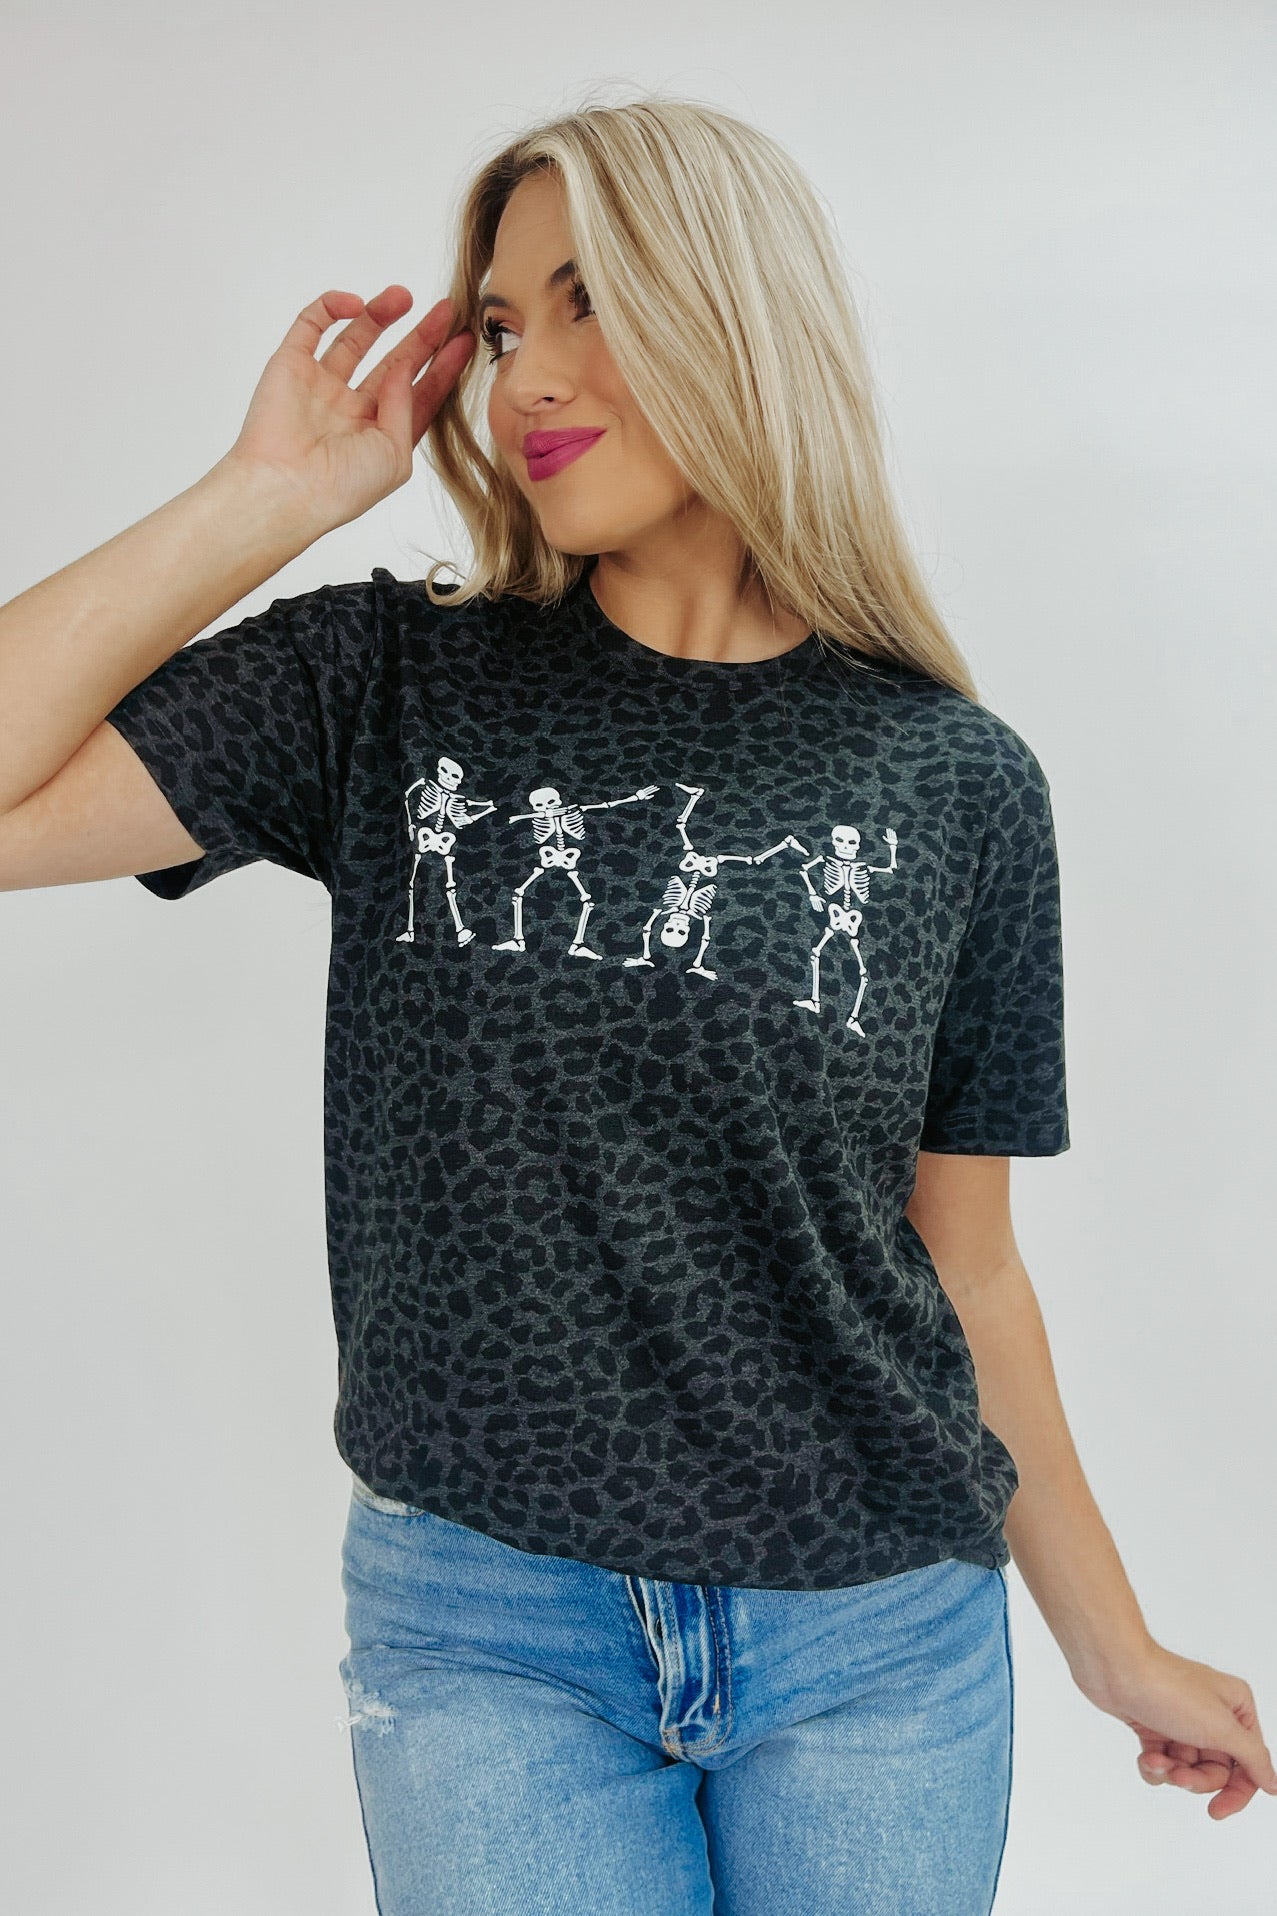 Dancing Silly Spooky Skeletons Graphic Tee